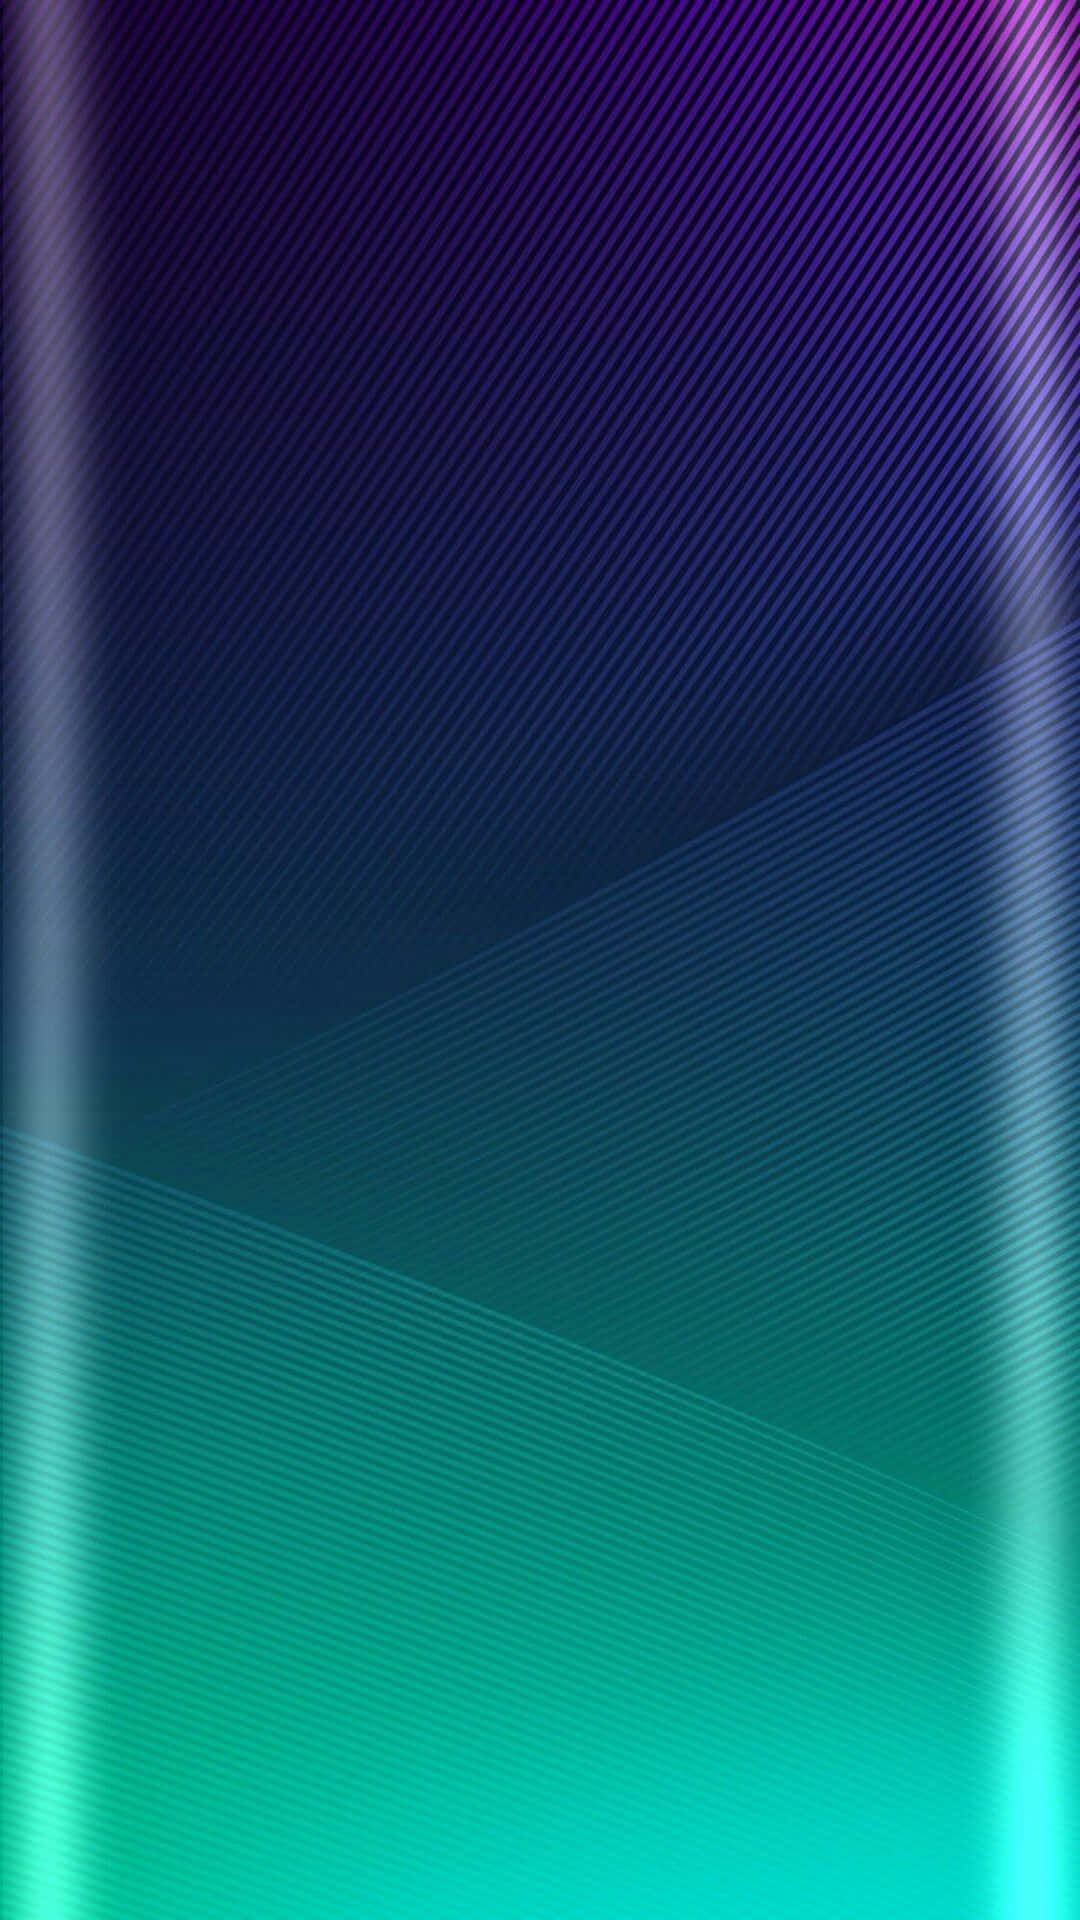 A Purple And Blue Background With A Blue And Green Stripe